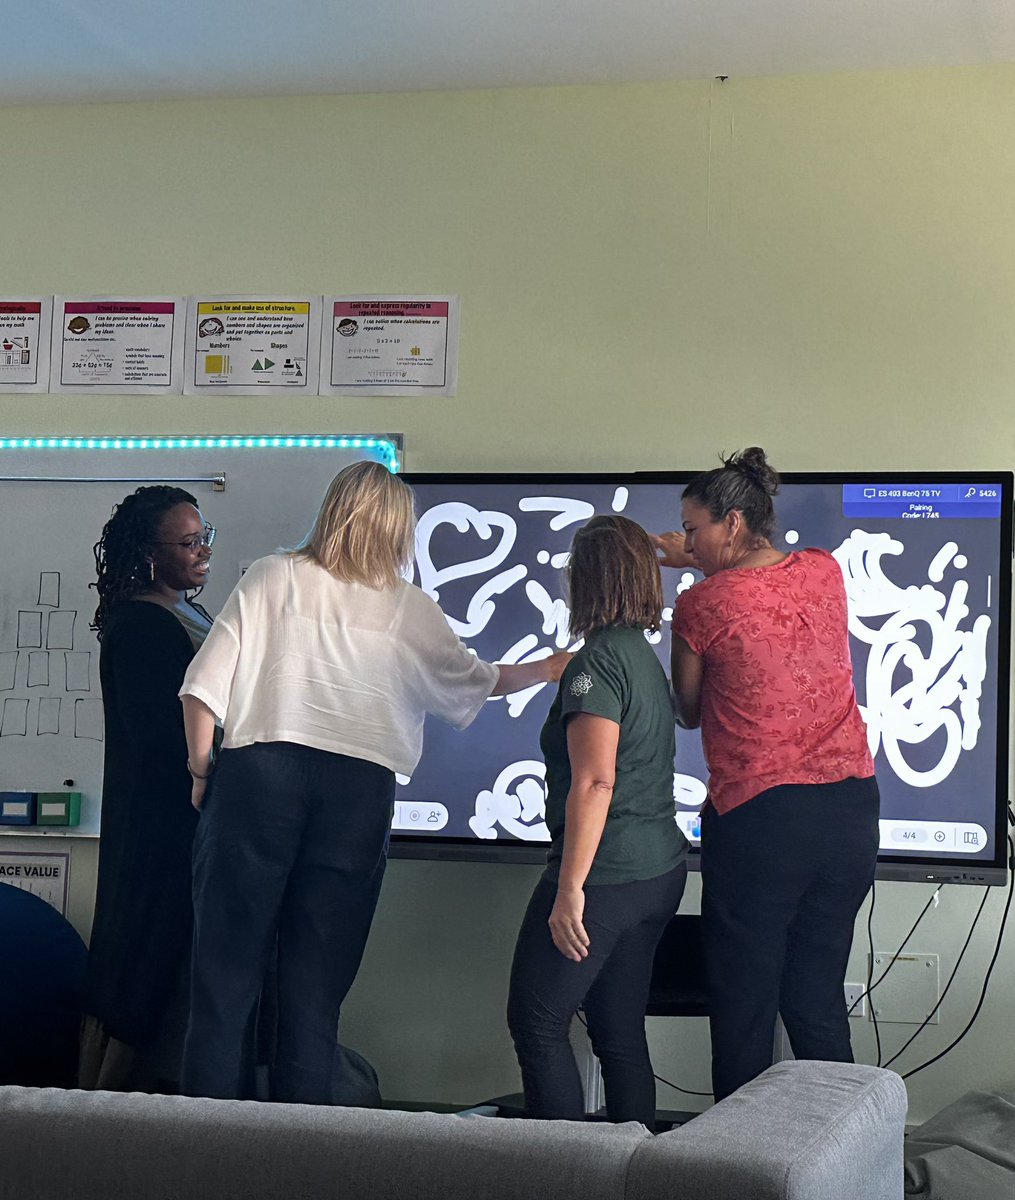 Yesterday some of our teachers got training from BenQ on the boards they are trialling. I captured a fun moment playing in multitouch whiteboard mode! #ACSLearns